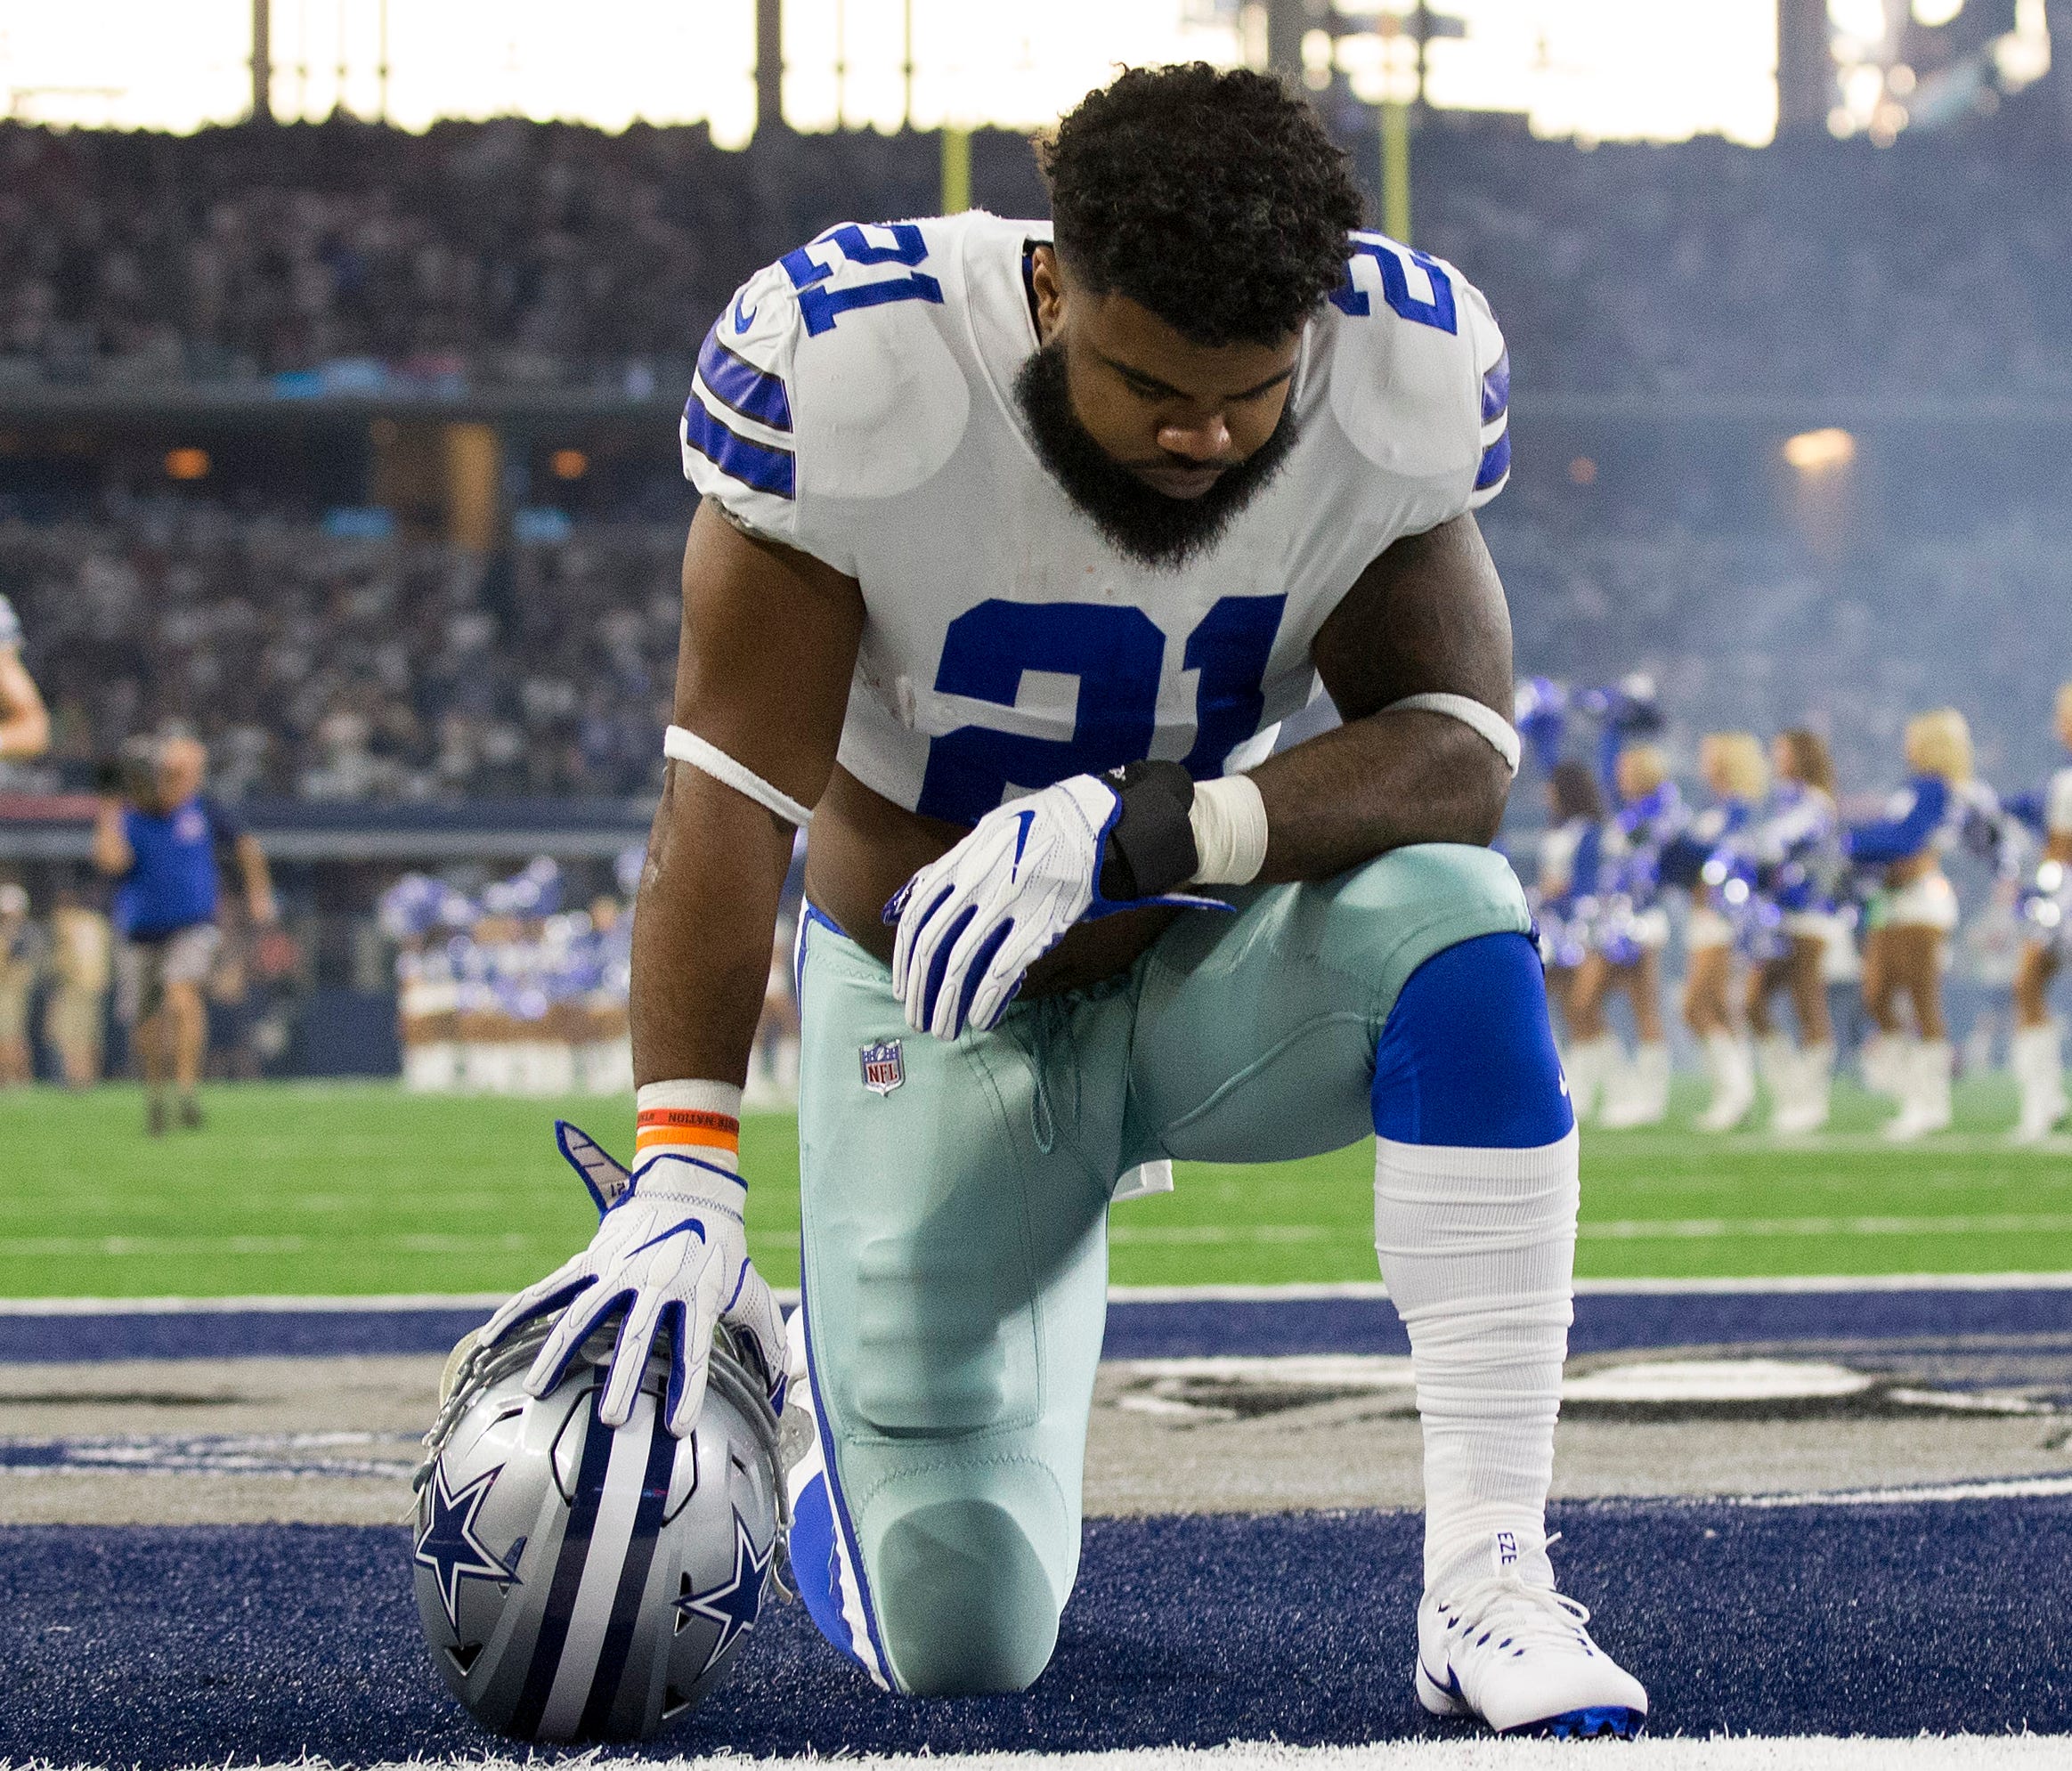 Dallas Cowboys running back Ezekiel Elliott (21) takes a moment prior to the game against the New York Giants at AT&T Stadium.